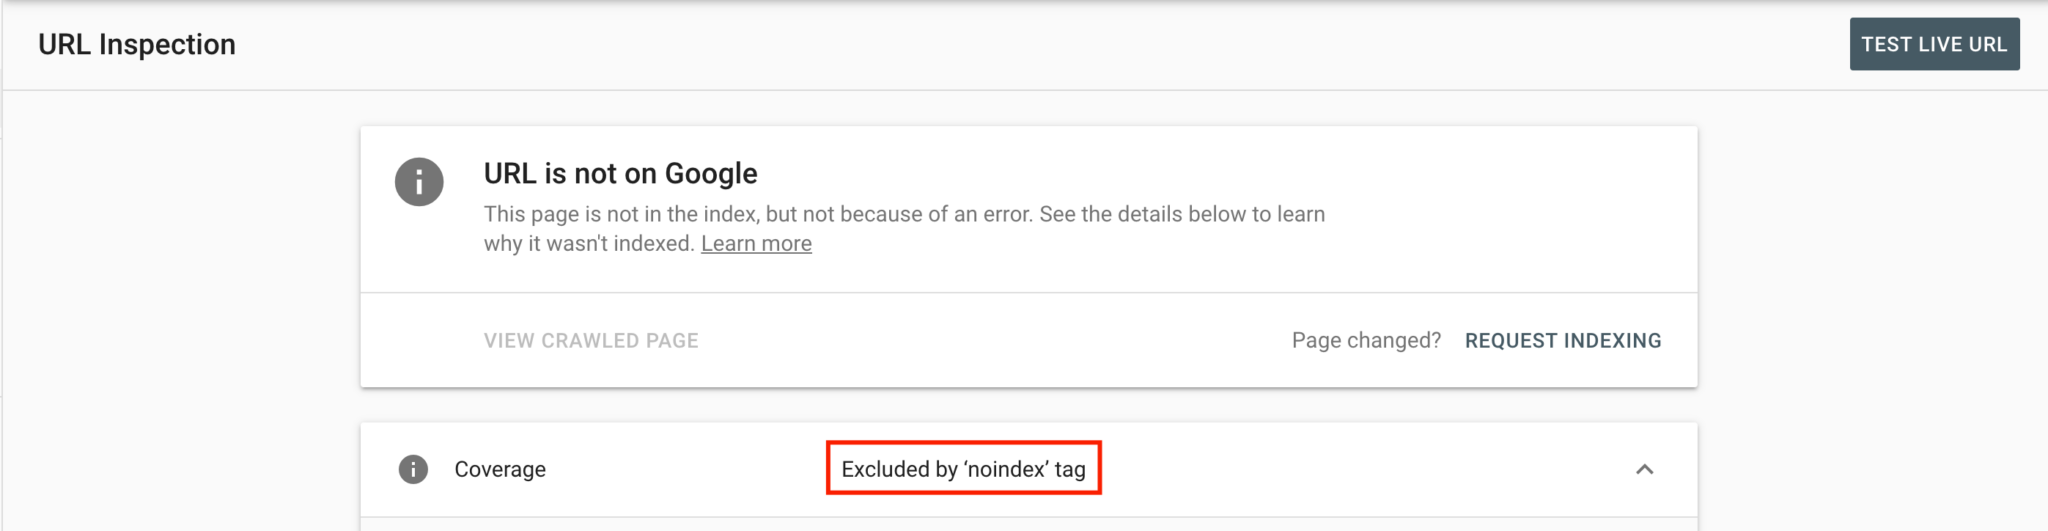 Example of using Google Search Console's URL testing tool for website crawlability SEO issues